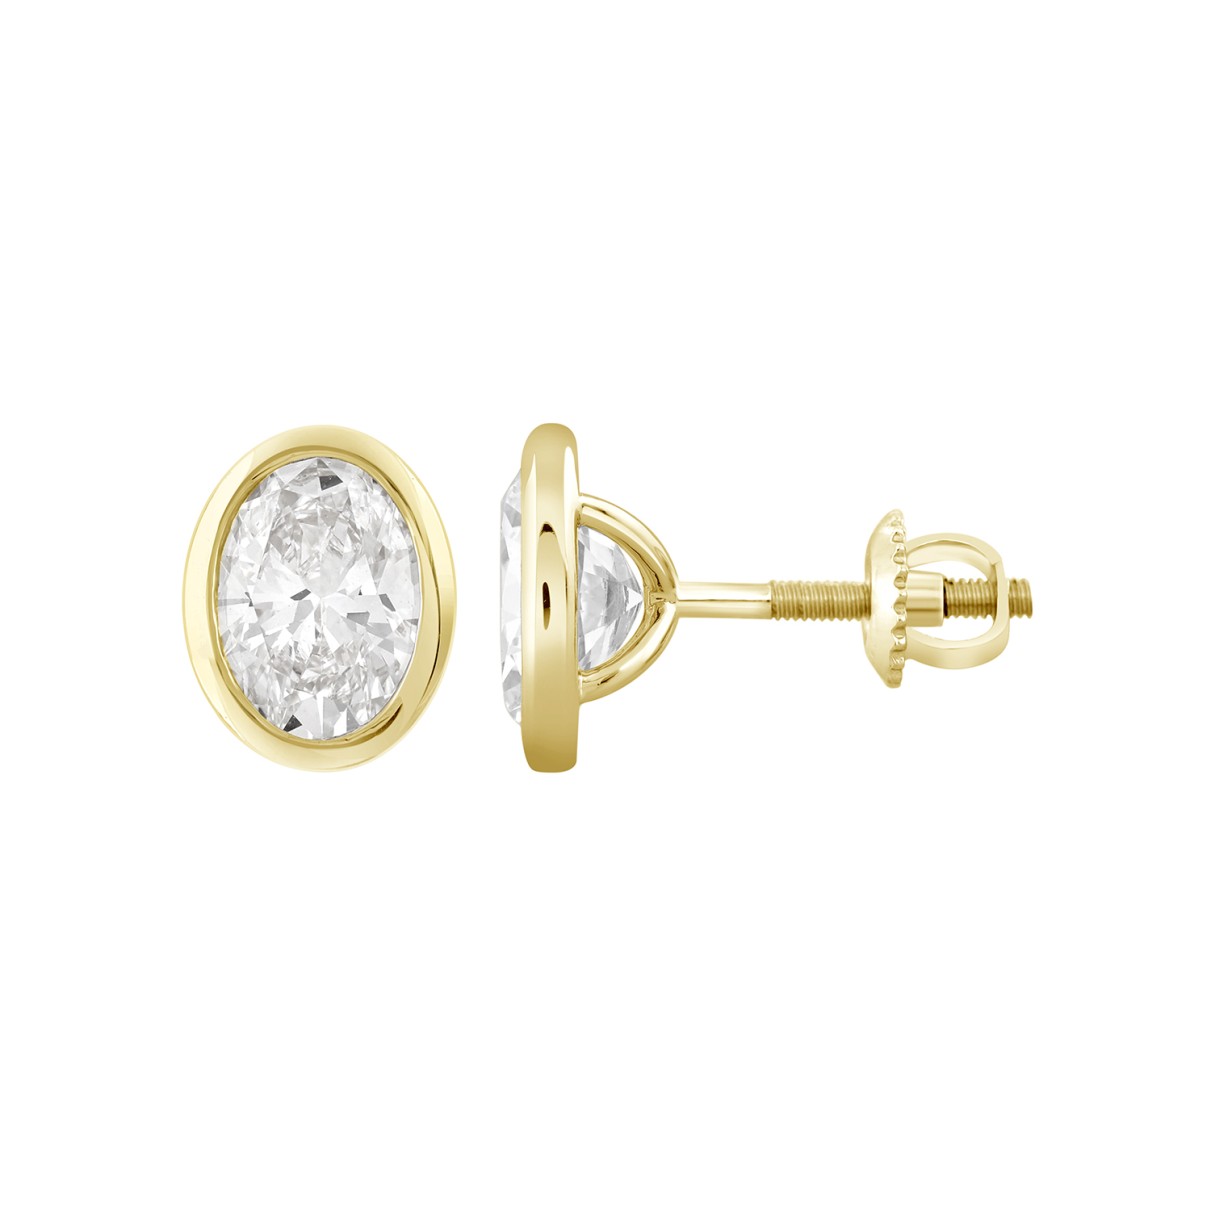 LADIES SOLITAIRE EARRINGS 1CT OVAL DIAMOND 14K YELLOW GOLD